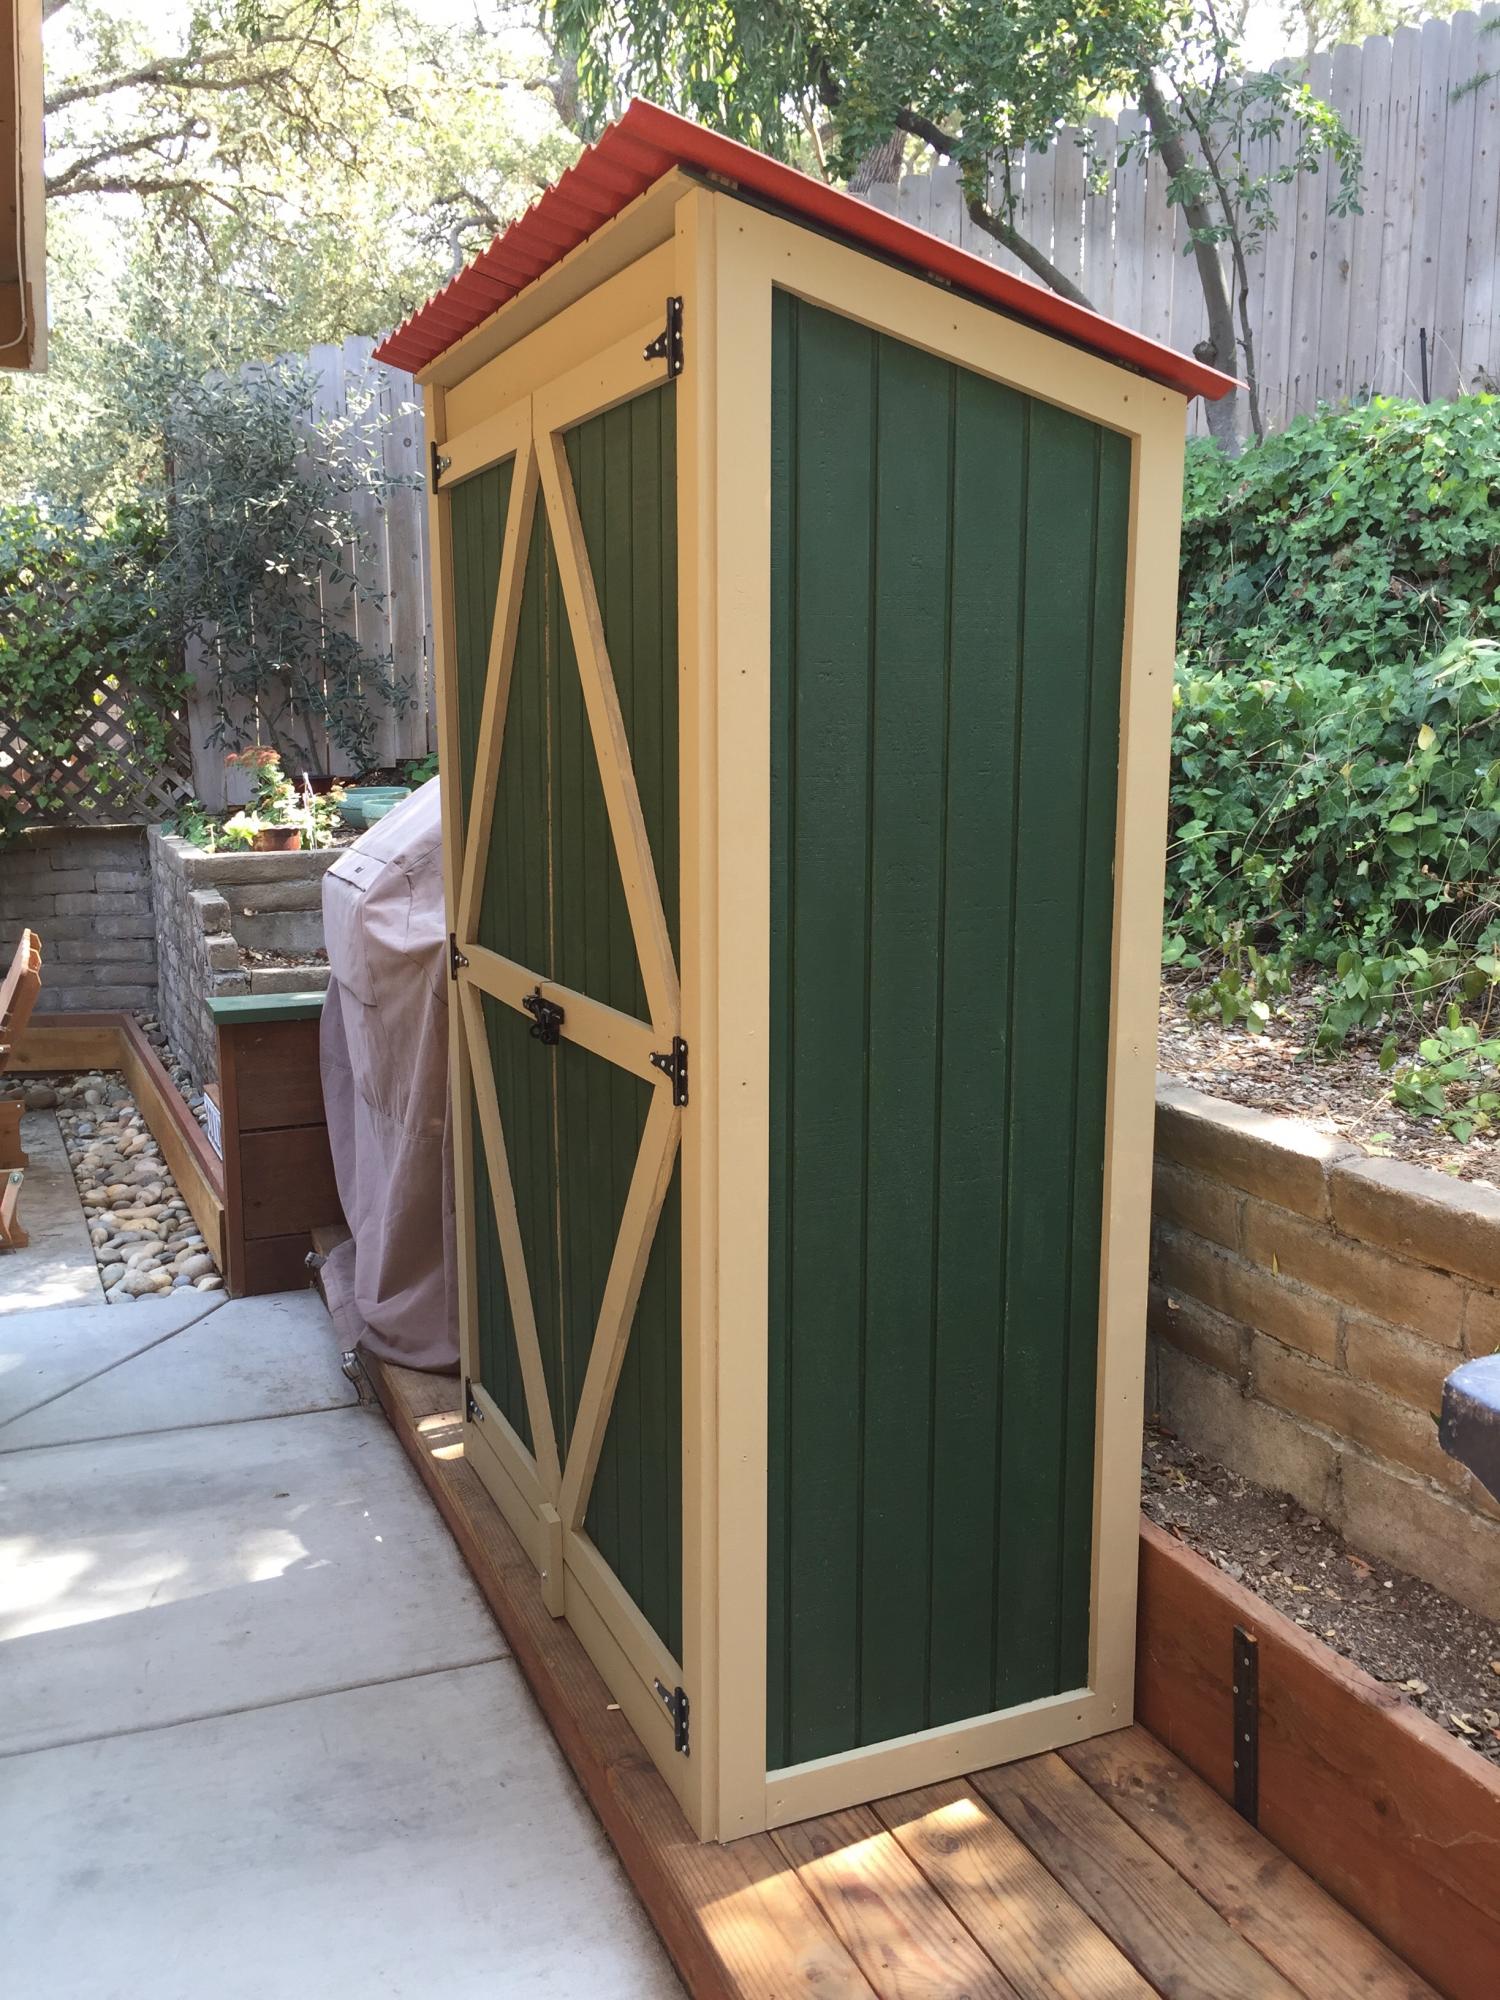 Garden Tool Shed Based On Plans For, Outdoor Tool Shed Plans